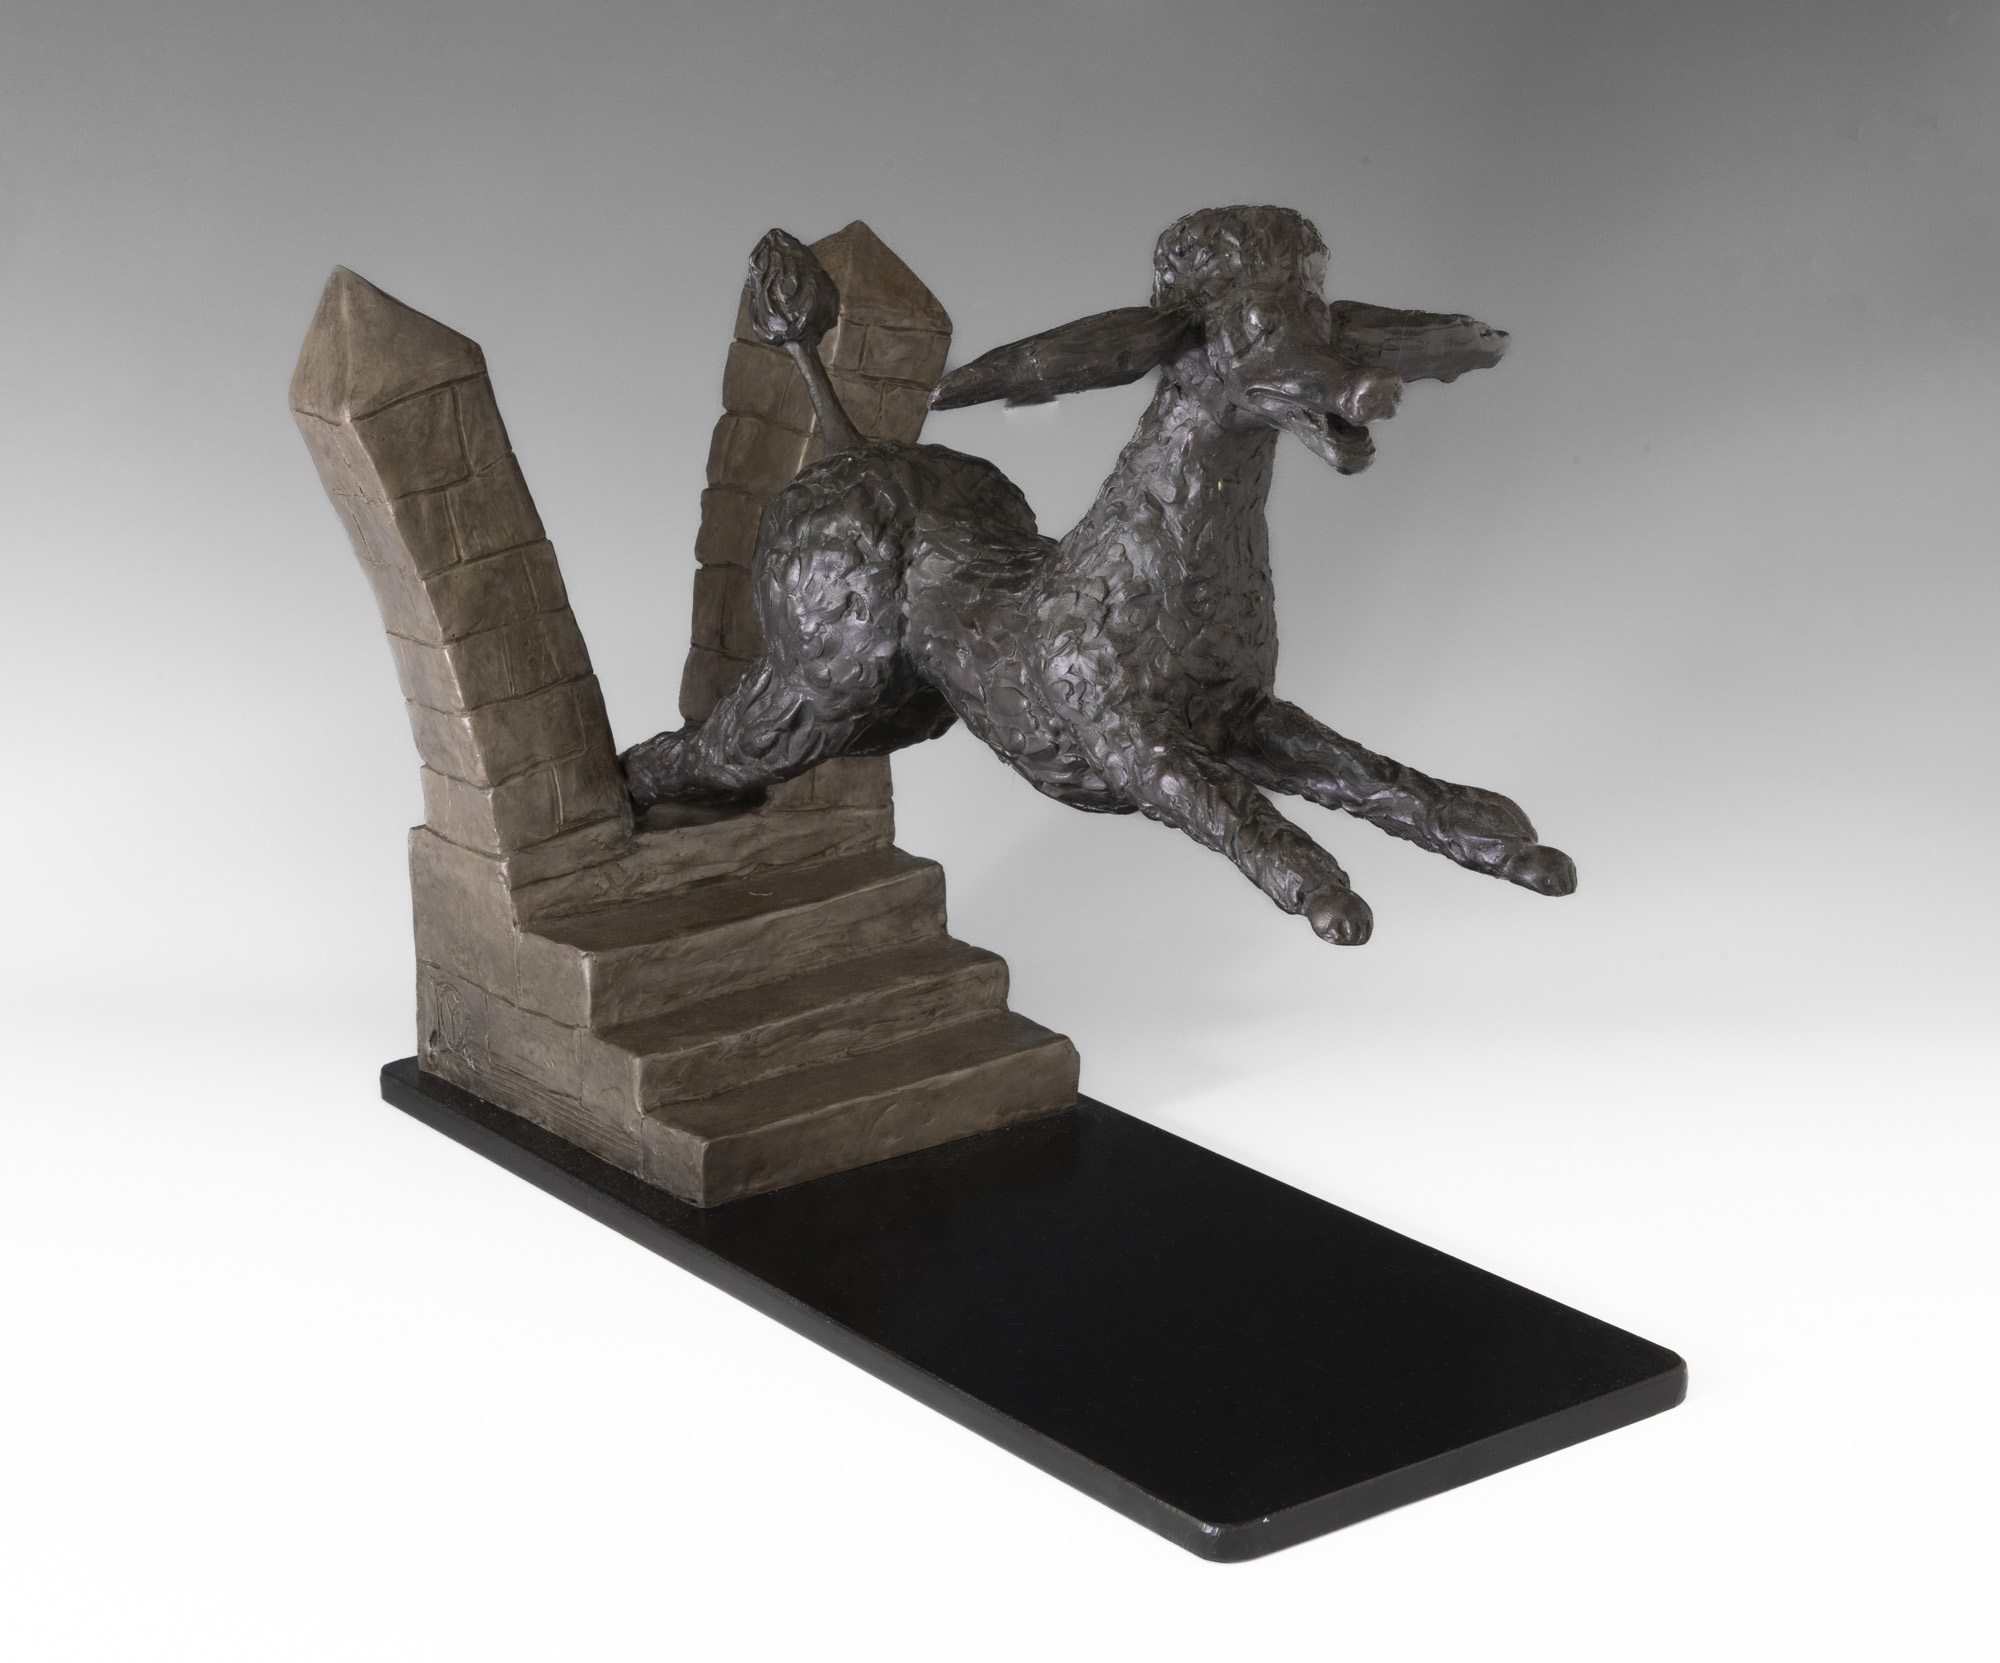 "Sophie the Flying Poodle"
Bronze
12.5 x 19.5 x 9